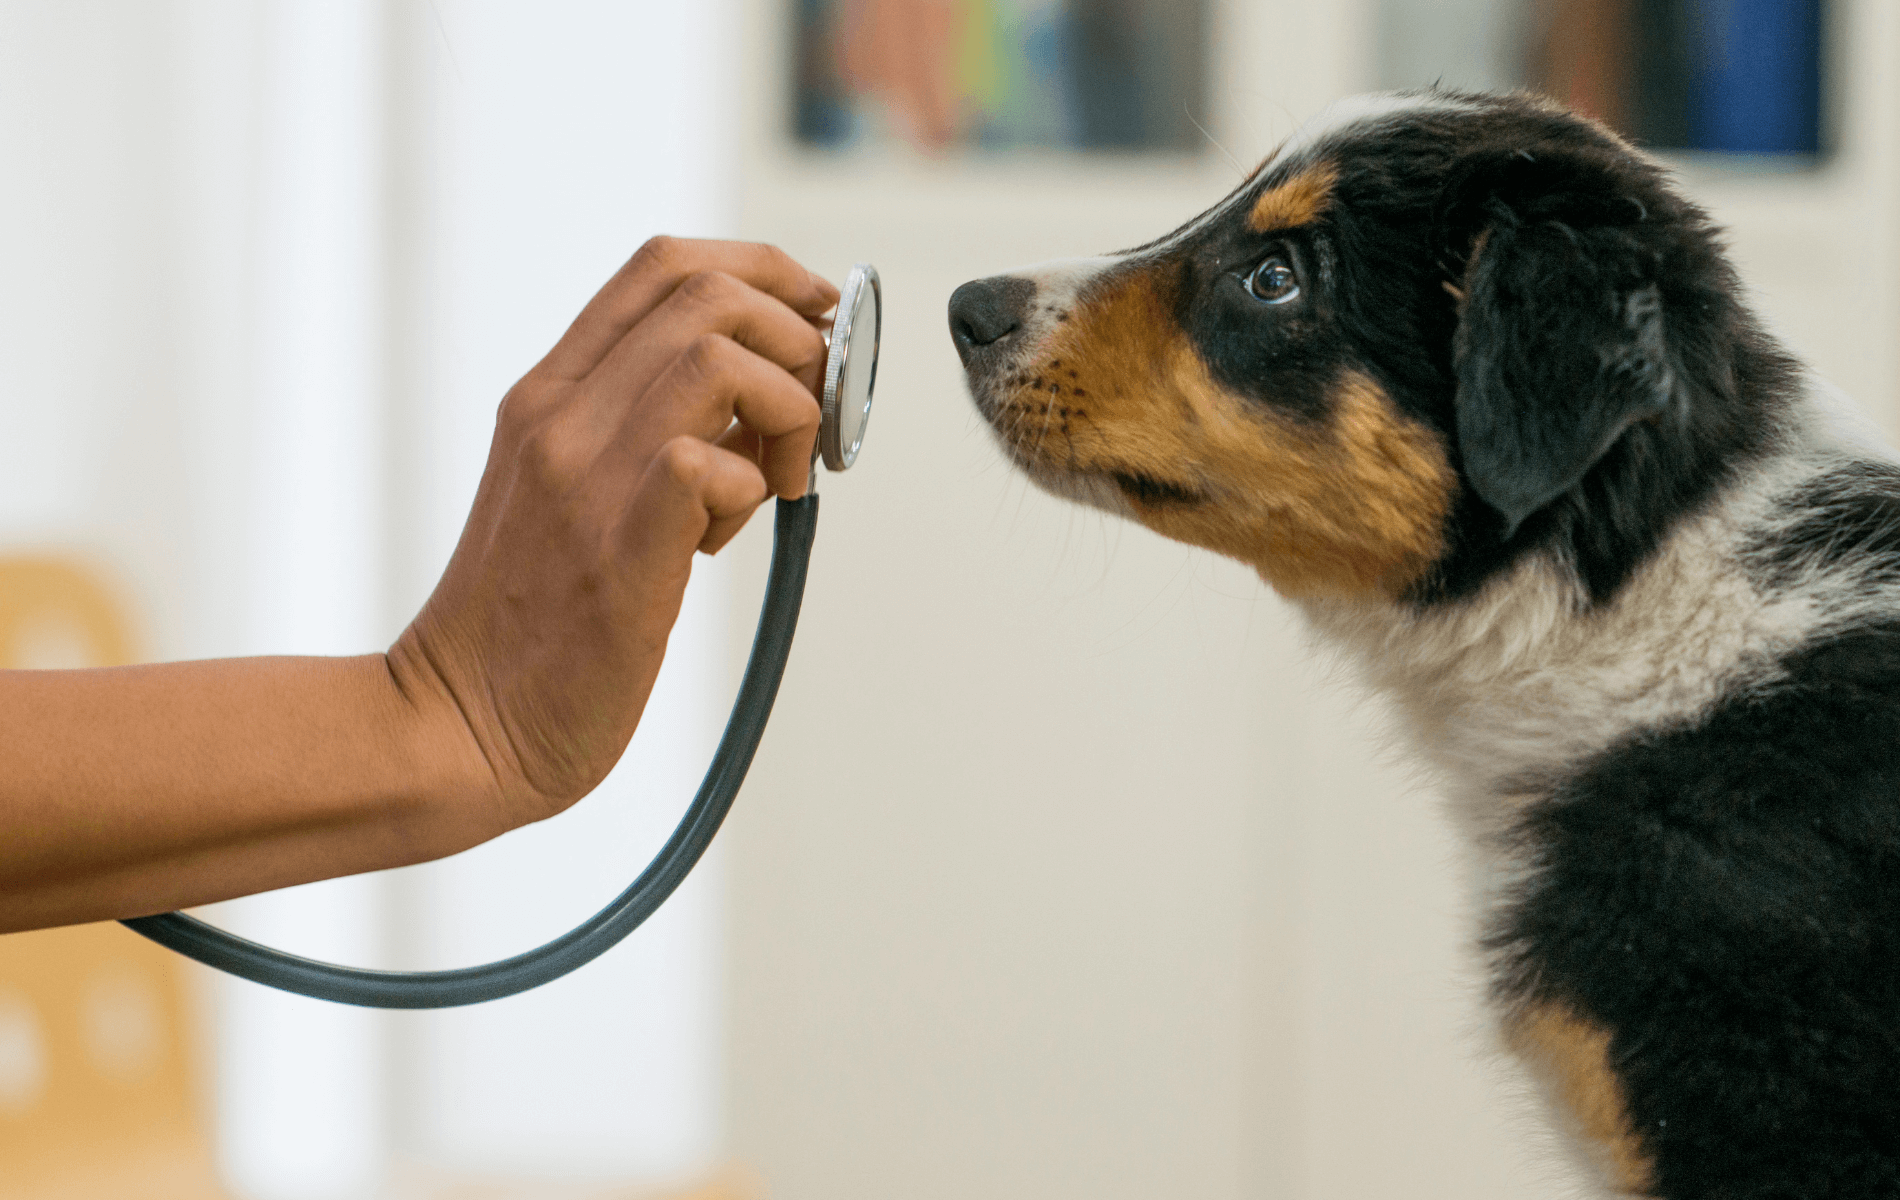 A dog looking at a stethoscope